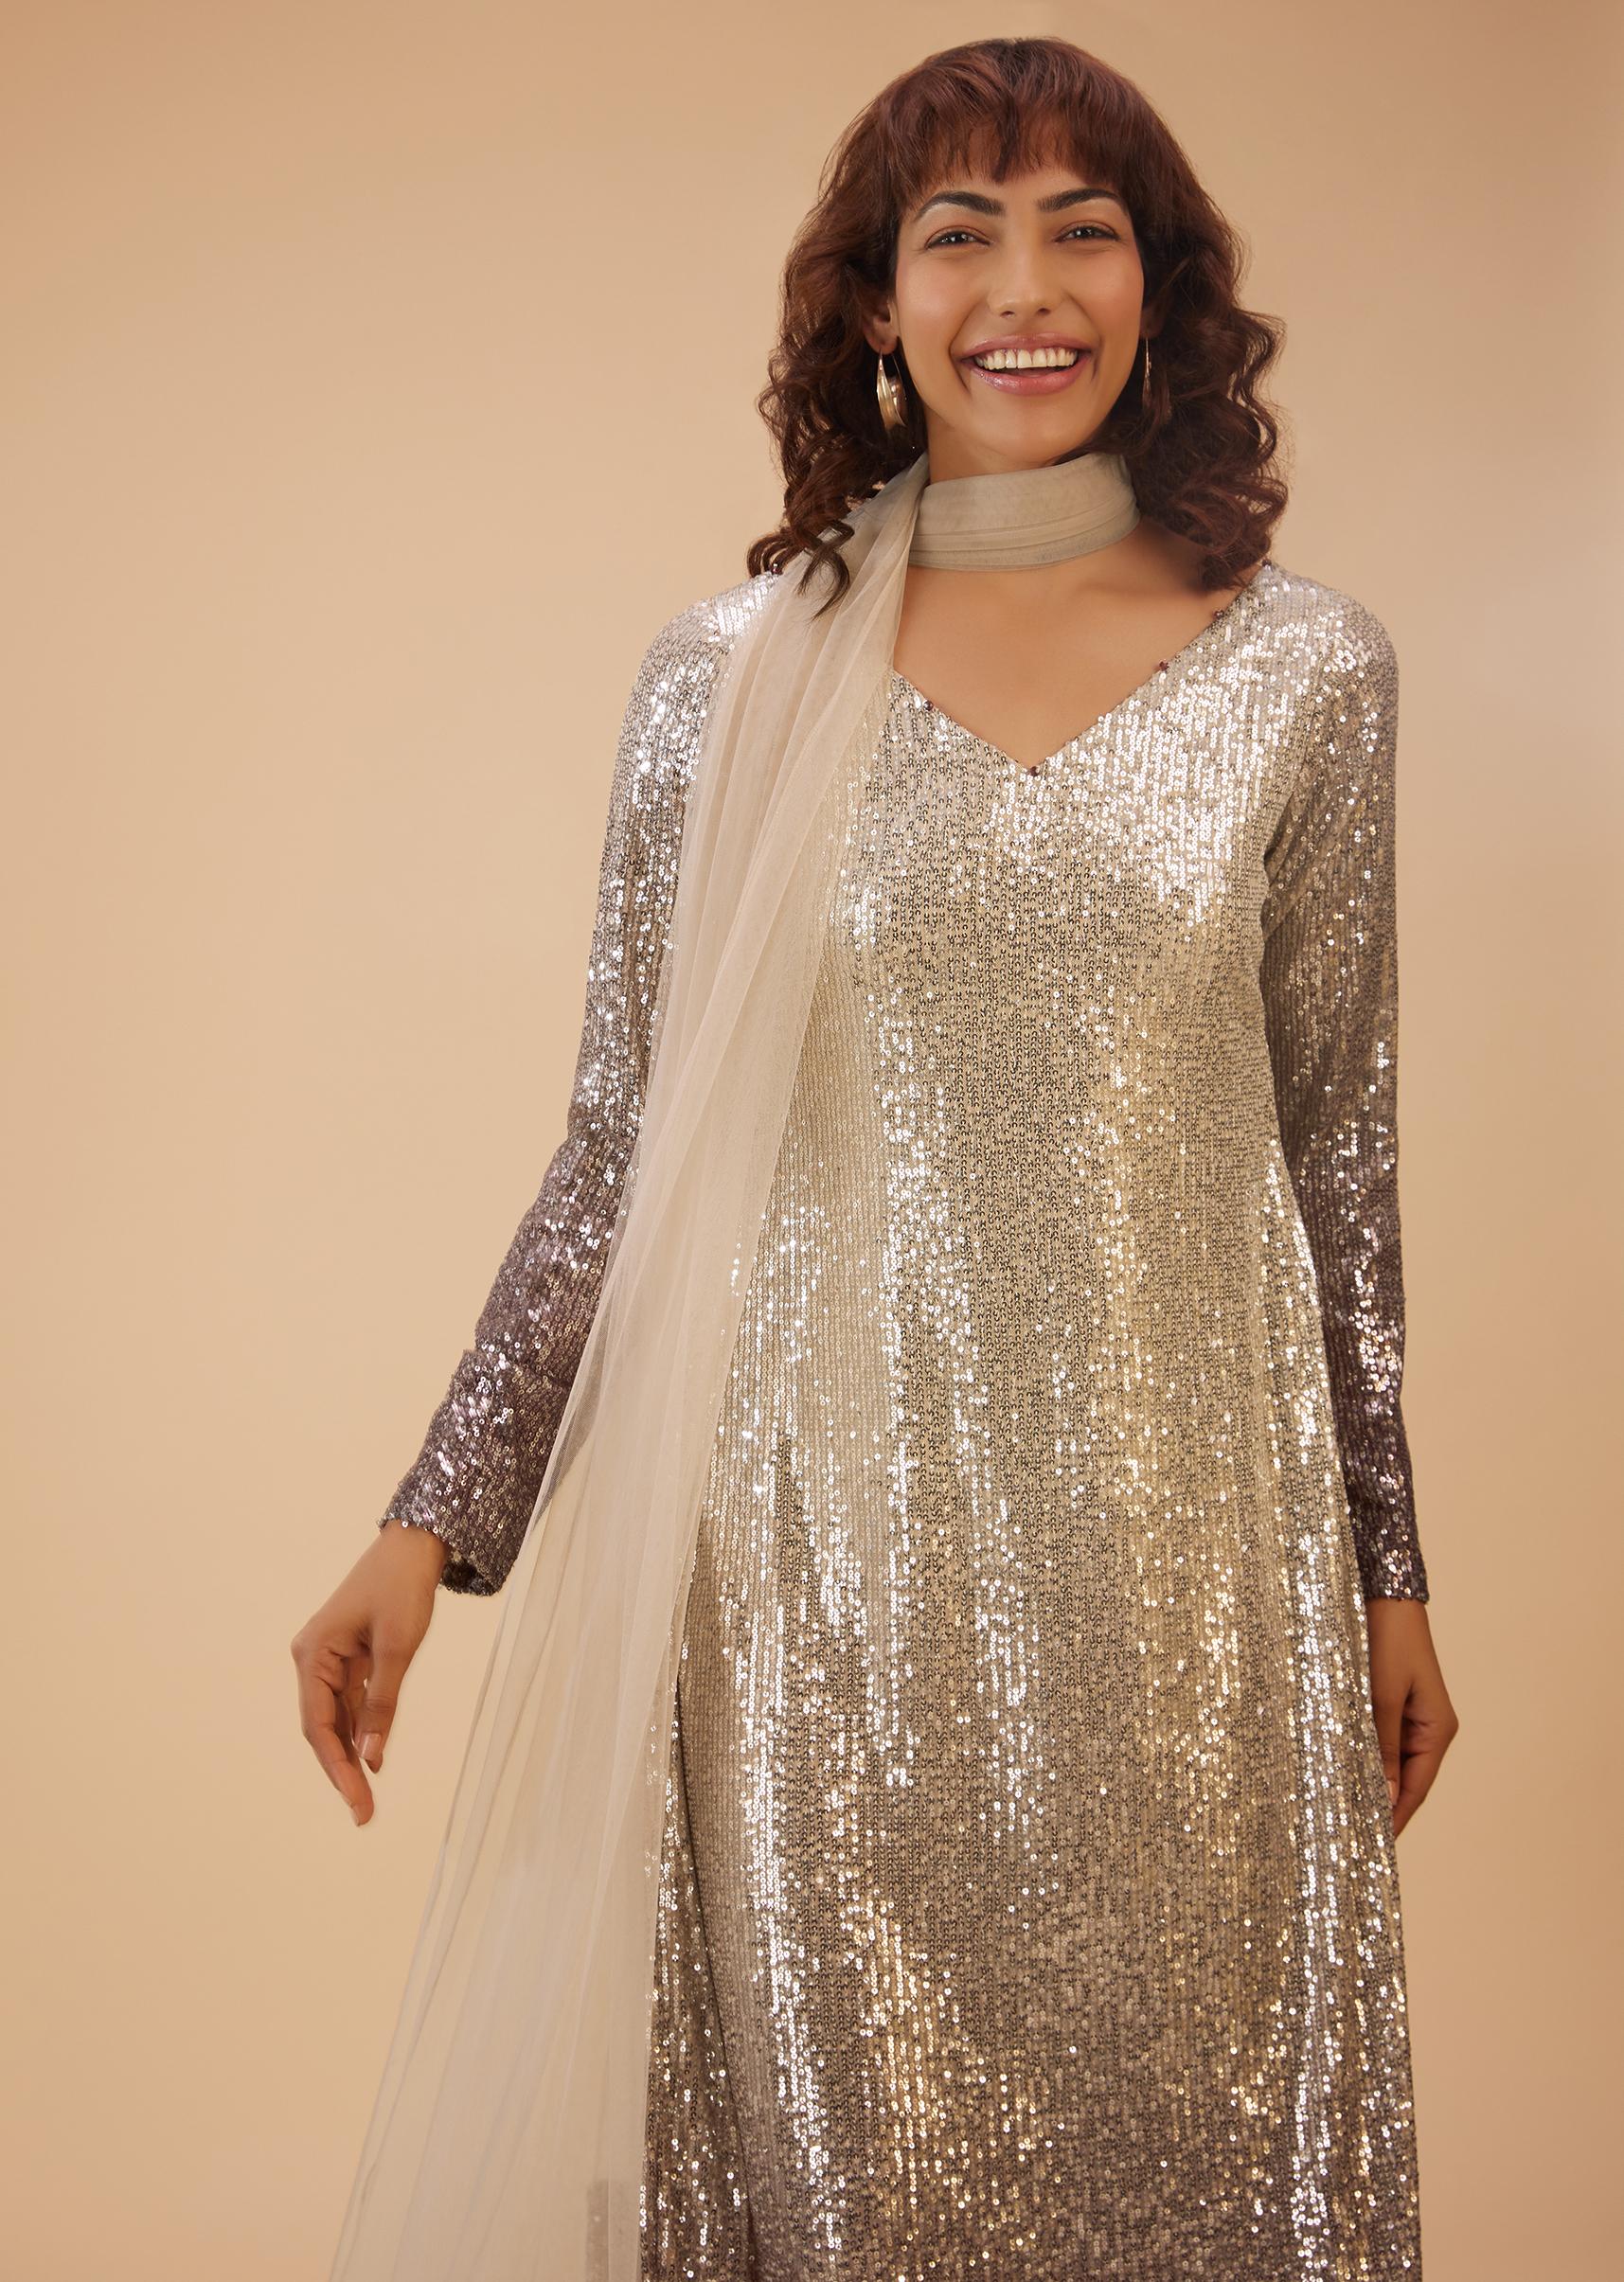 Kalki Fashion,SG111640,Coffee Brown And Silver Gradient Shade Pant Suit Set In Sequins